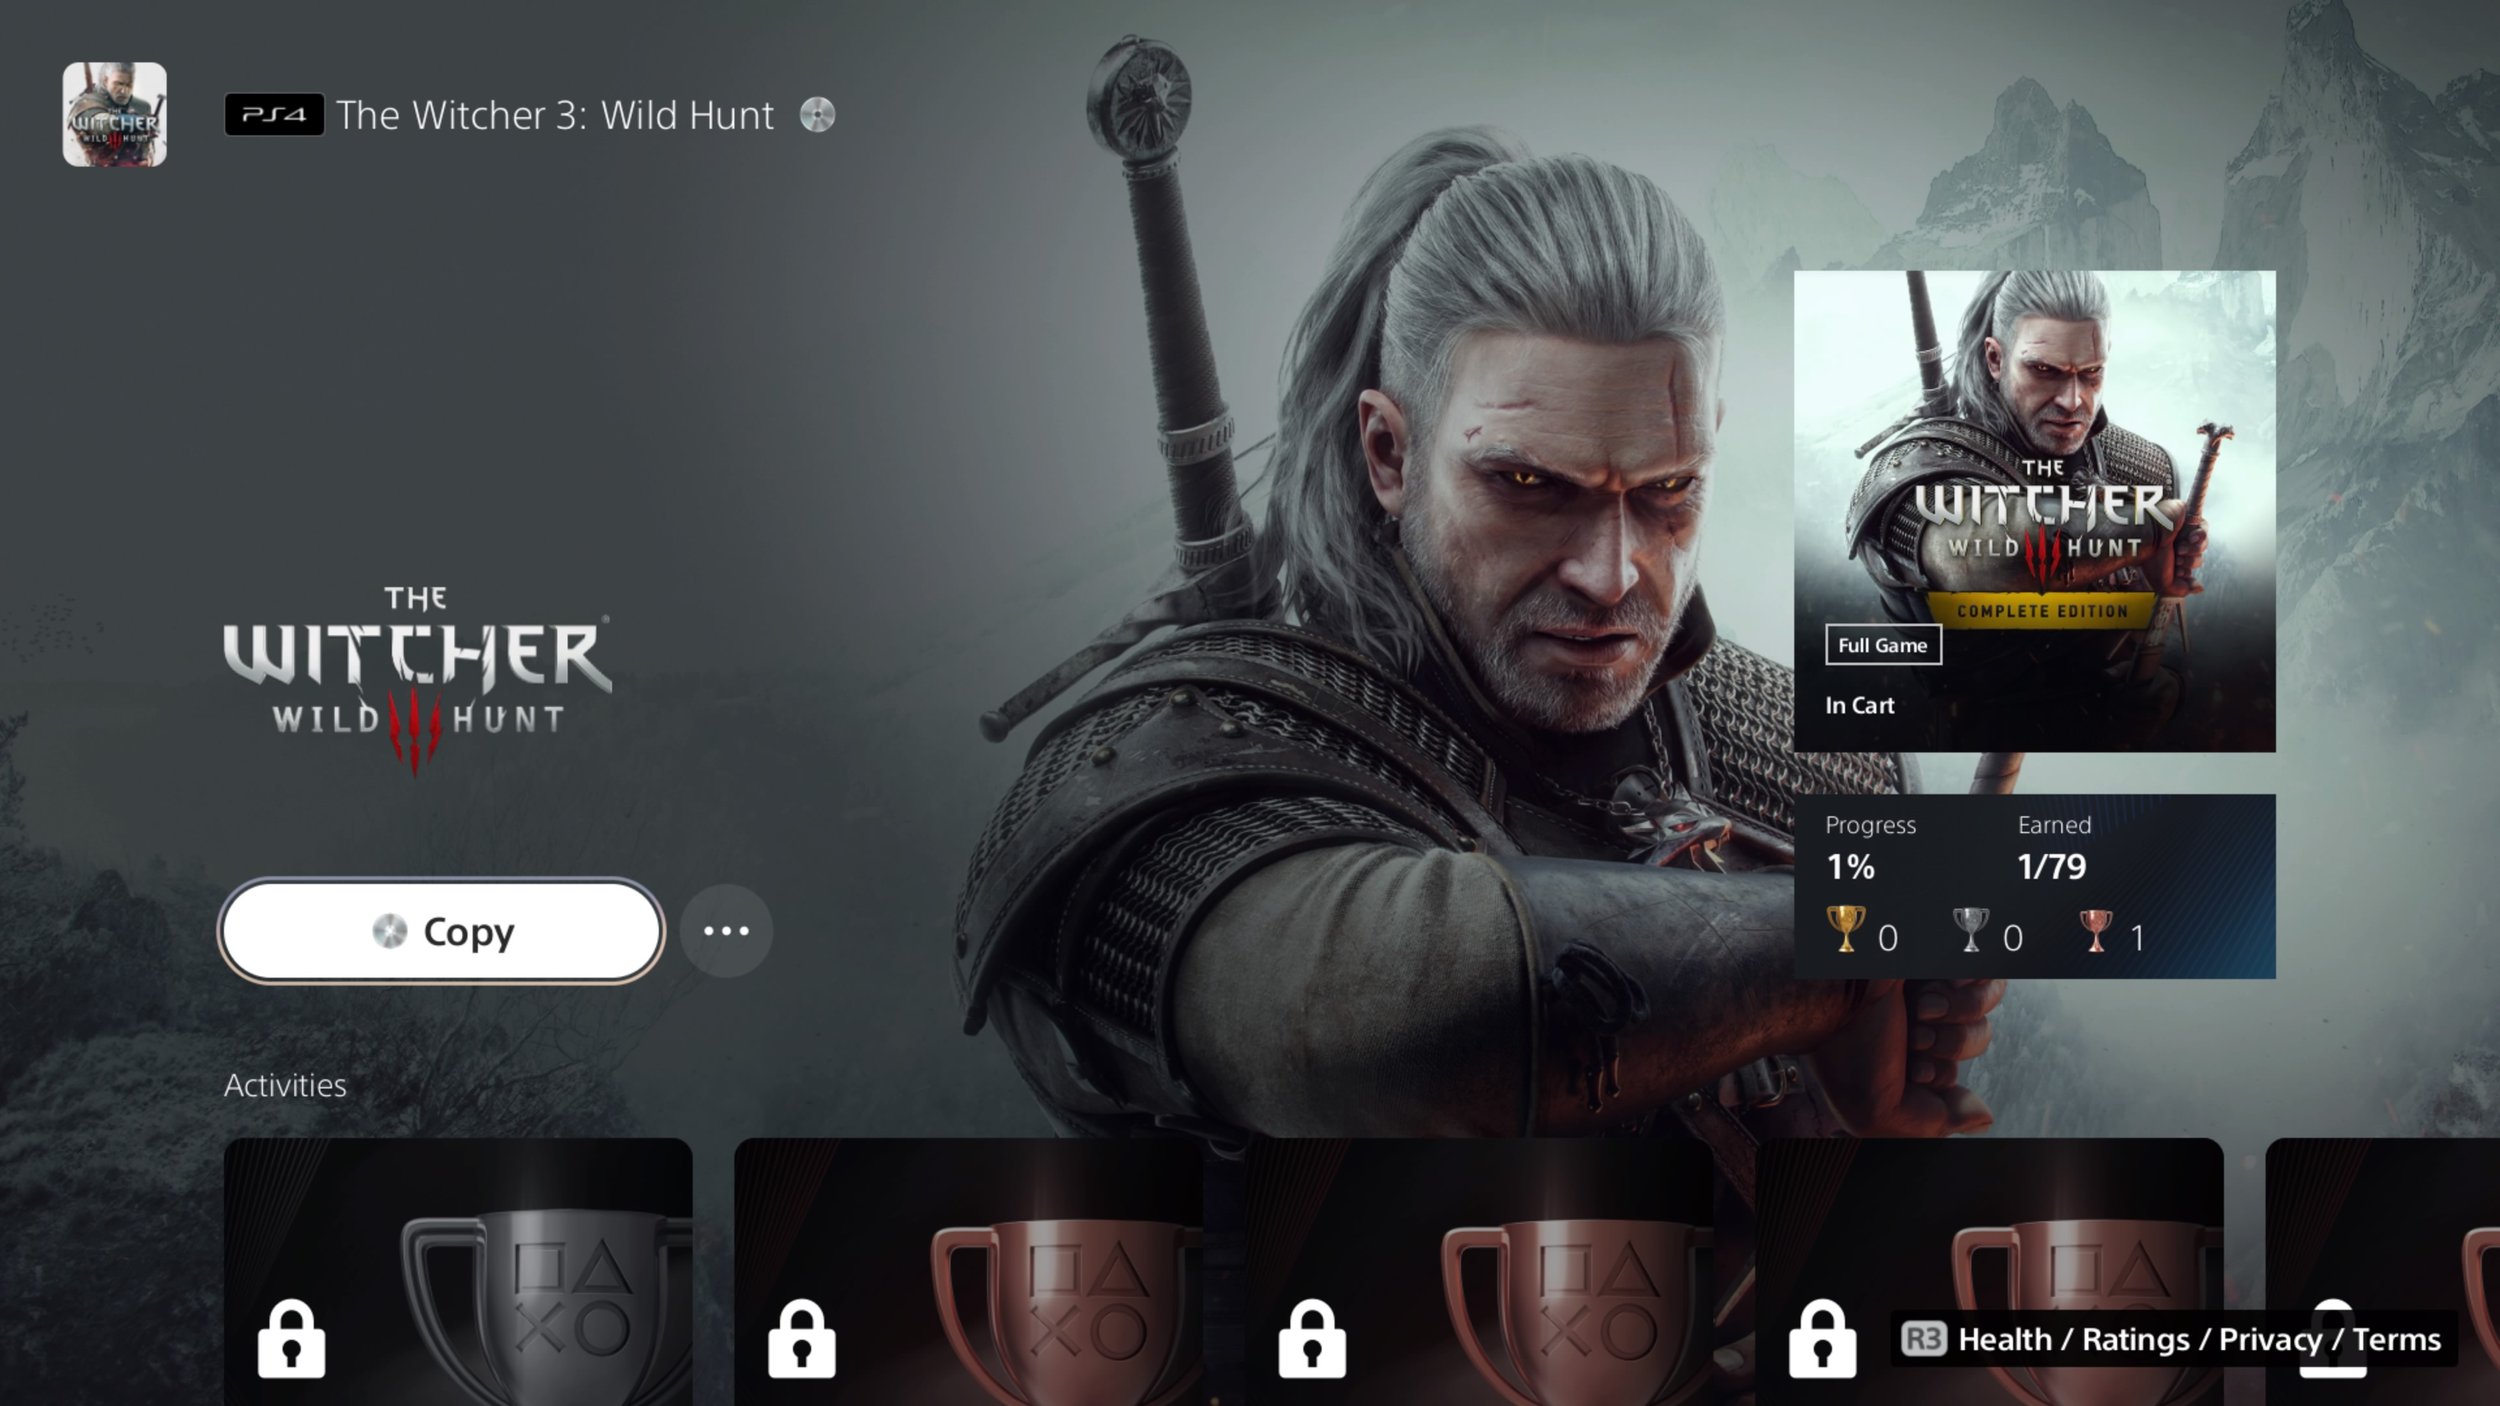 The Witcher 3 next-gen is getting a physical release next week